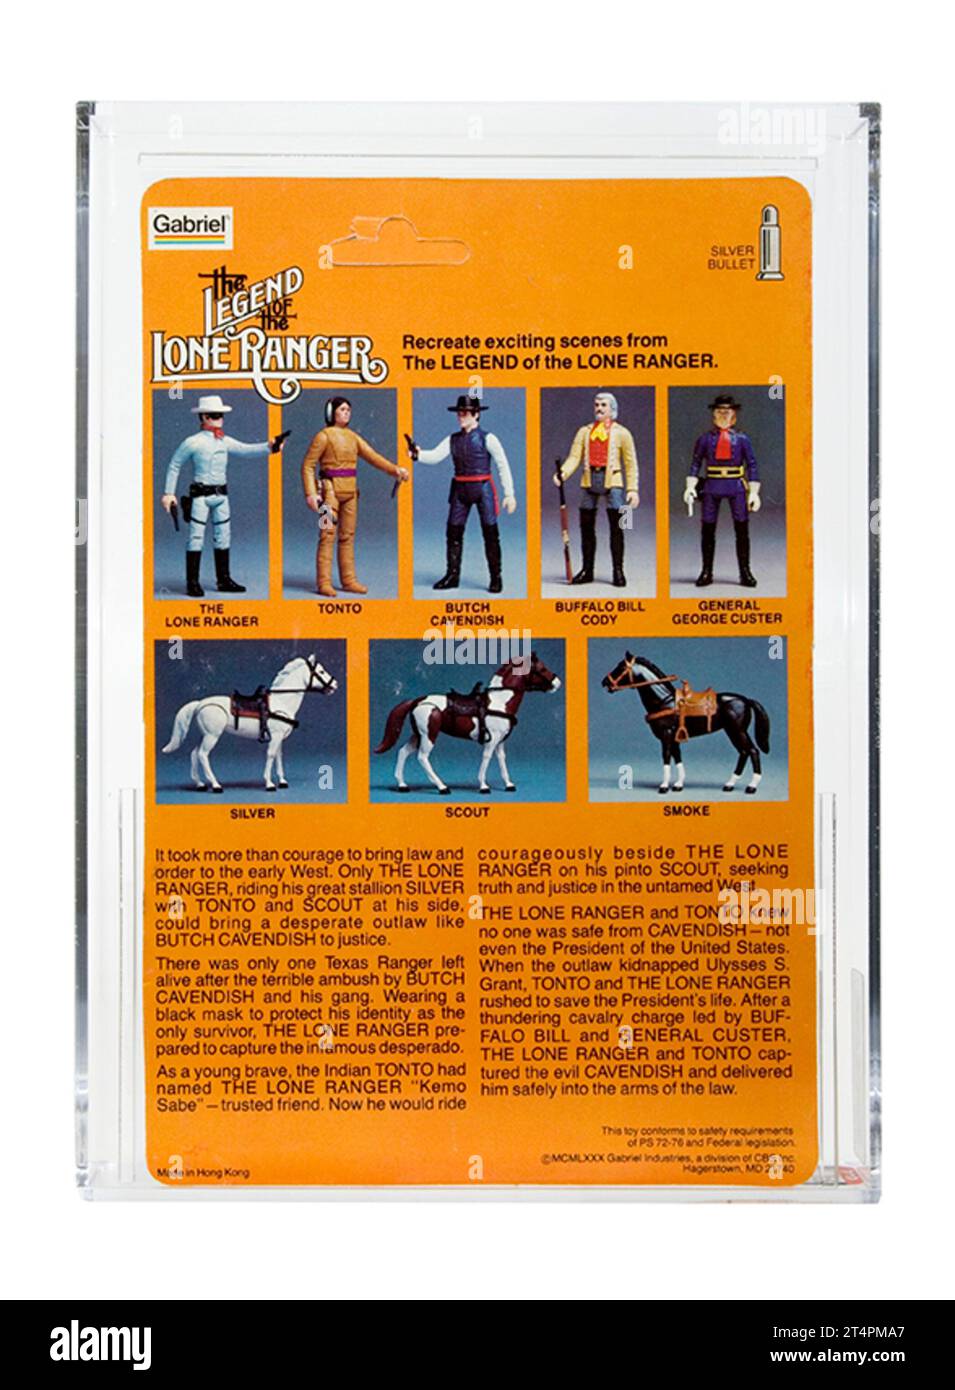 1980 Gabriel Toys The Legend of The Lone Ranger General George Custer Carded Action Figure AFA 80-Y Near Mint Stock Photo